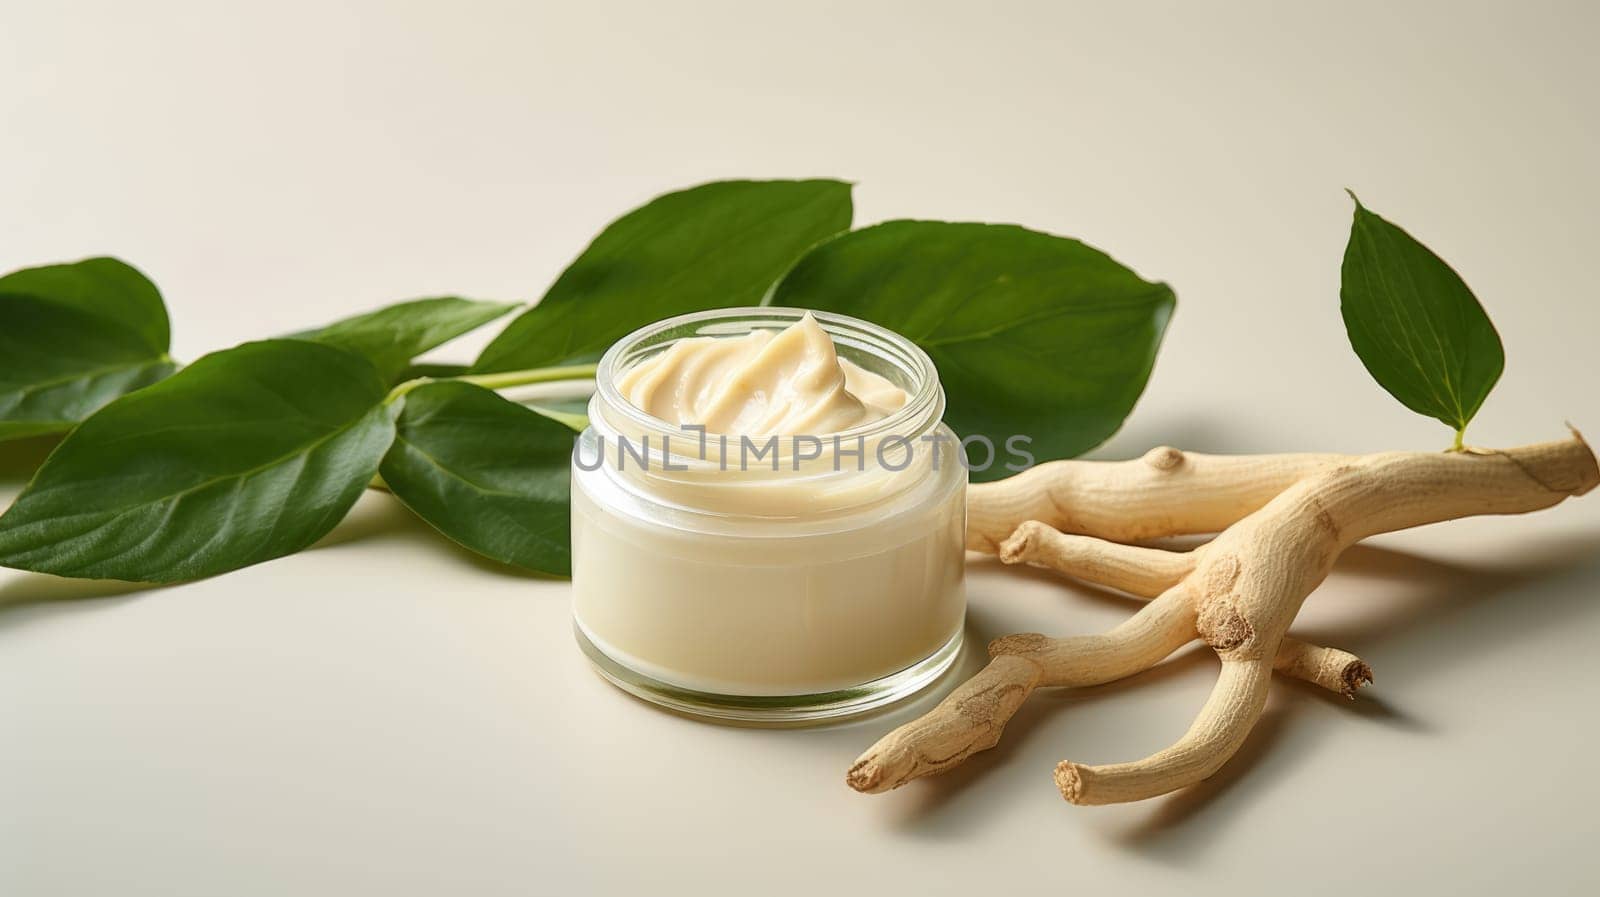 Cream with extract of Ginseng on a light background by natali_brill